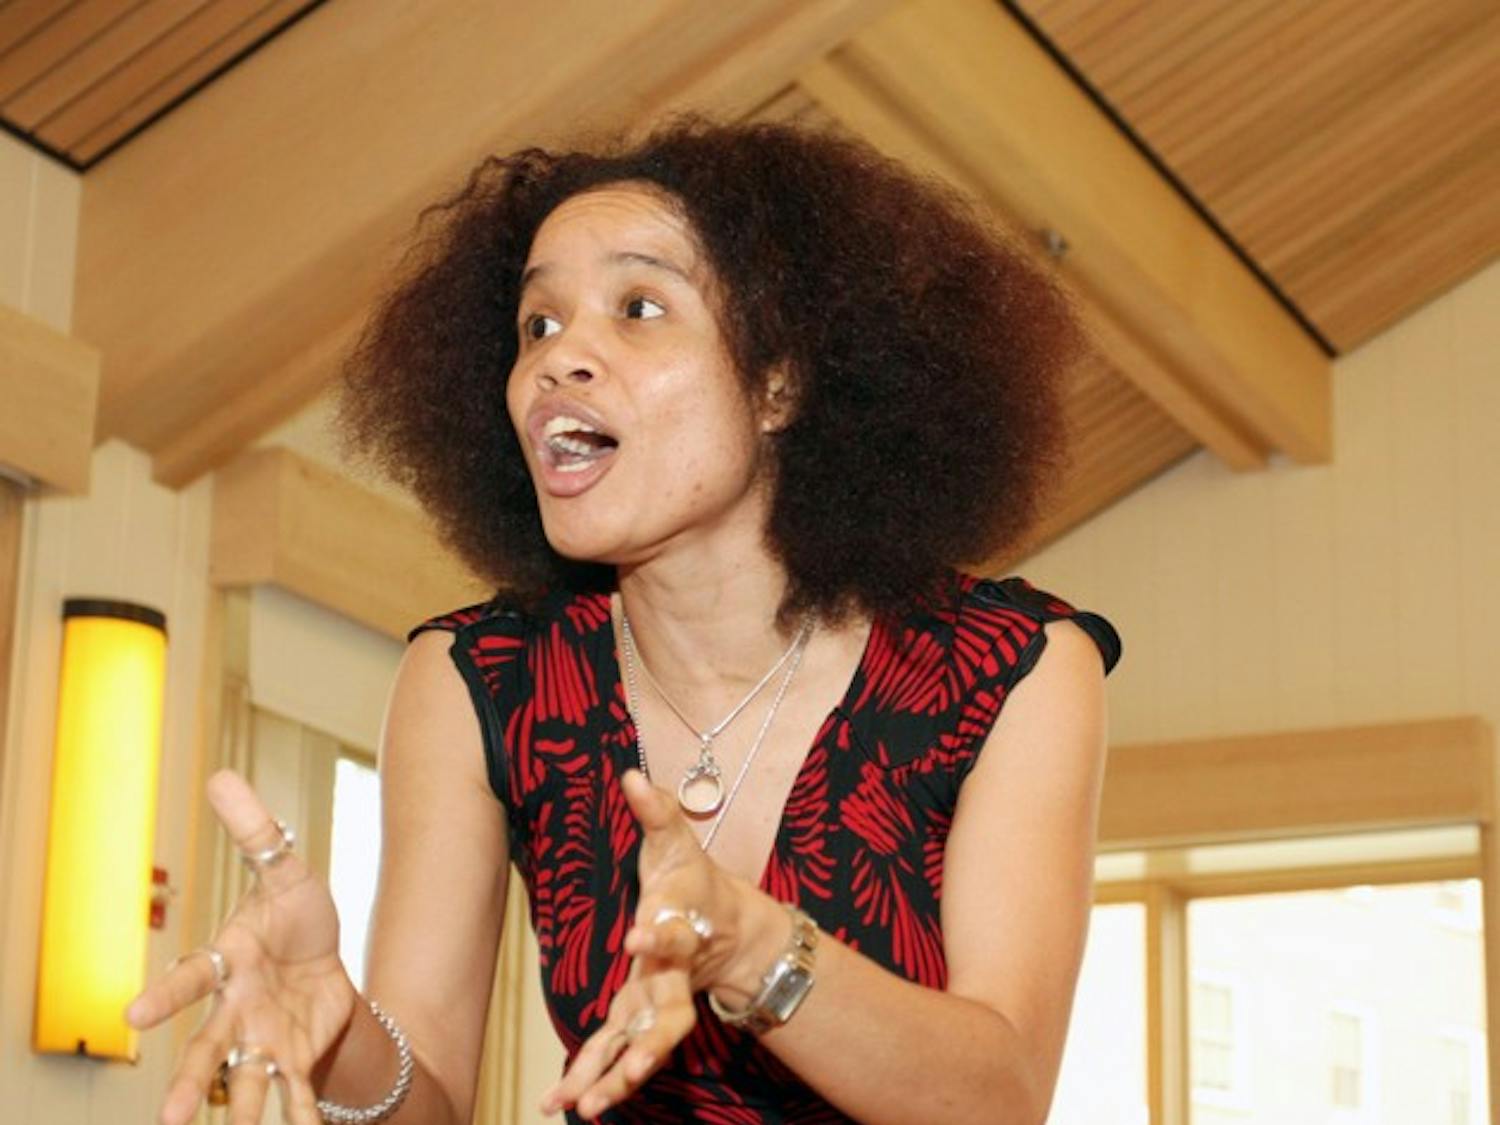 Staceyann Chin, the Center for Women and Gender's eighth annual Visionary in Residence, met with students at a dinner Wednesday.